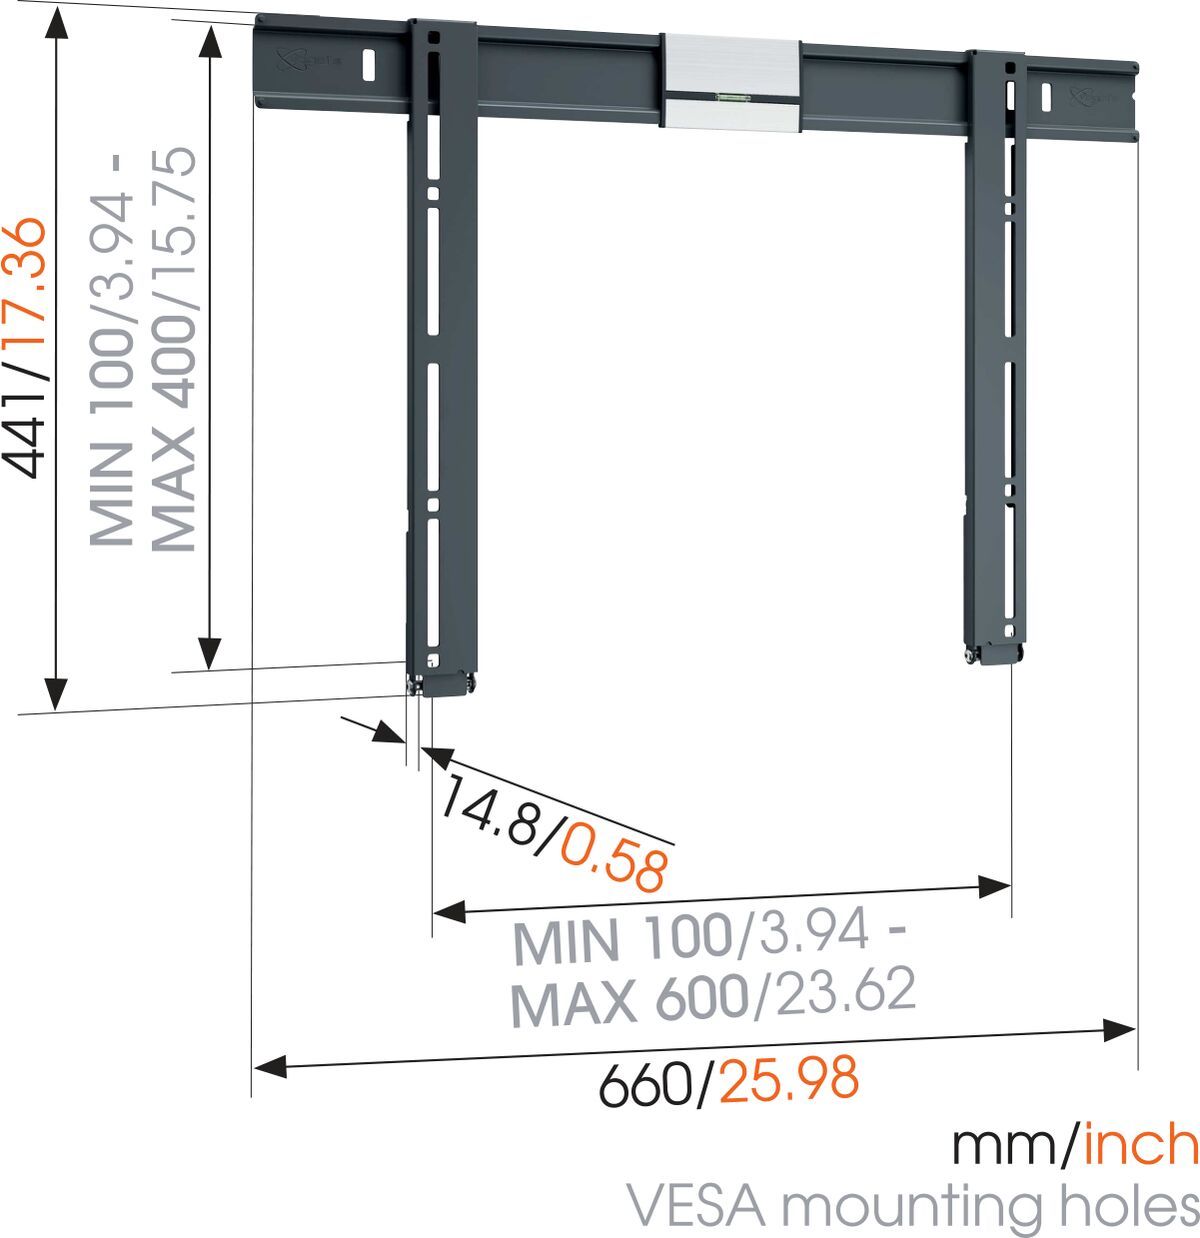 Vogel's THIN 505 ExtraThin Fixed TV Wall Mount